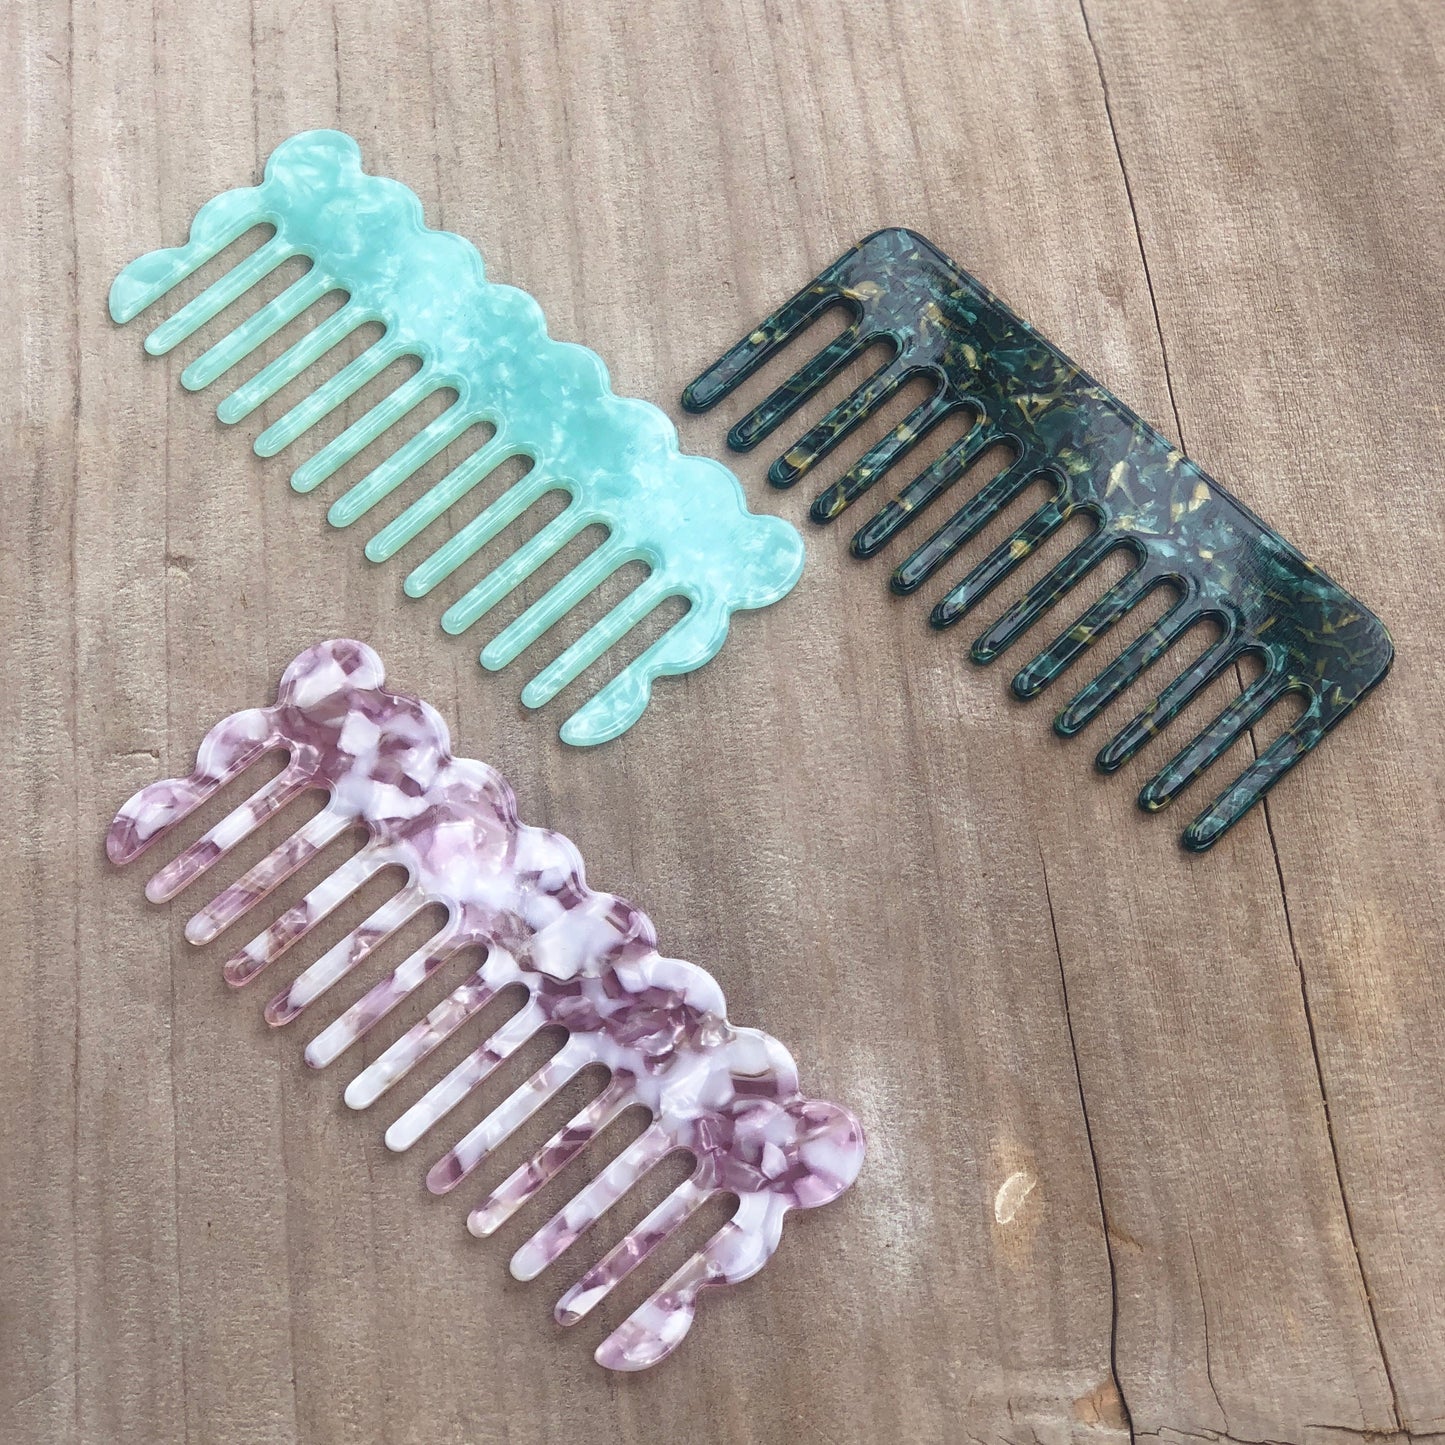 Buy Mint Wide Tooth Comb - House Of Hair New Zealand Haircare